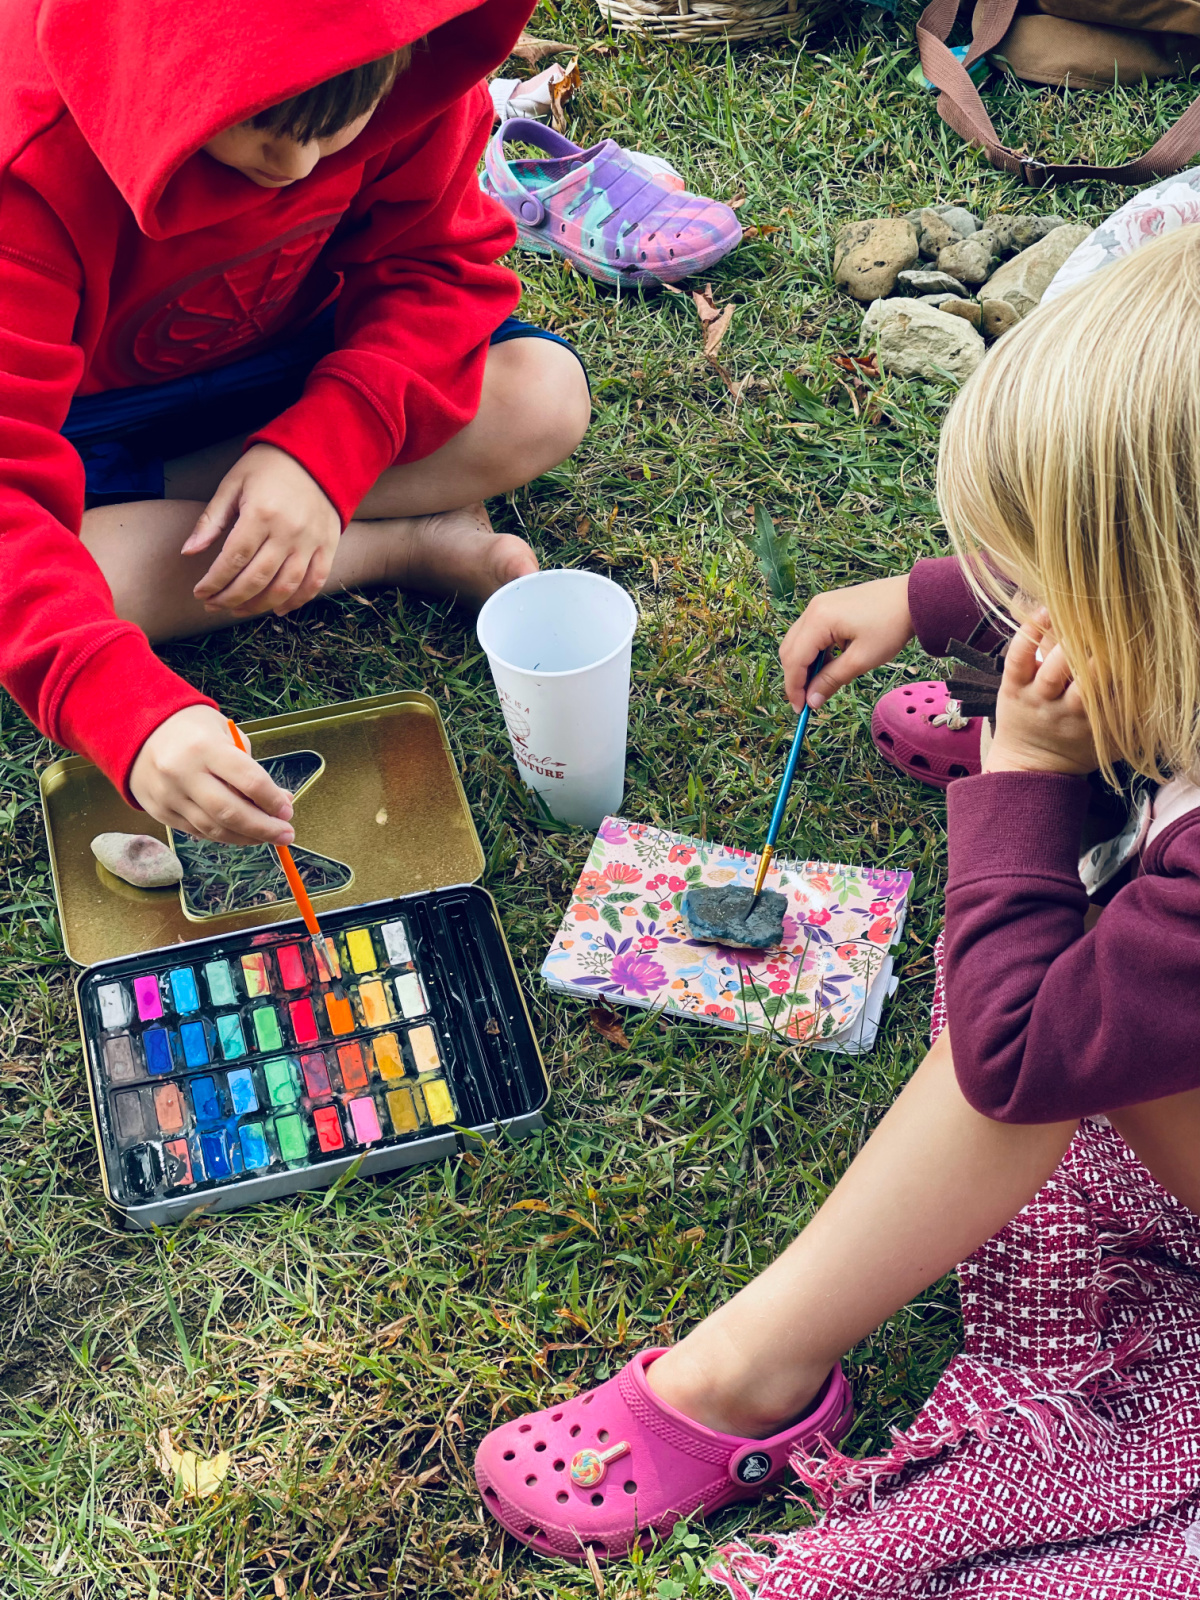 two homeschooled kids sitting on grass painting rocks with water colors.